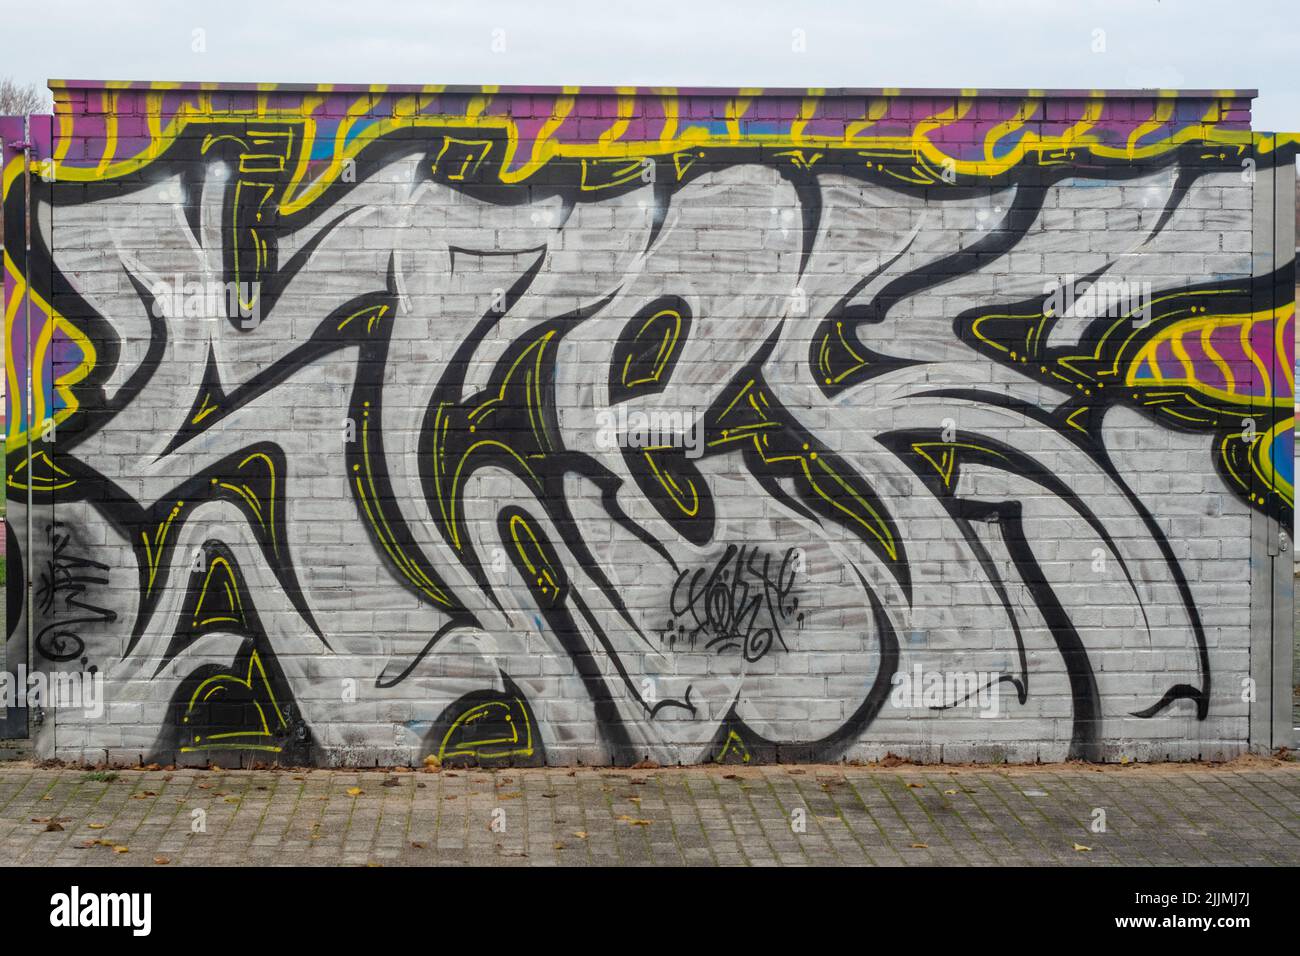 A brick wall with graffiti art in Bottrop, Germany Stock Photo